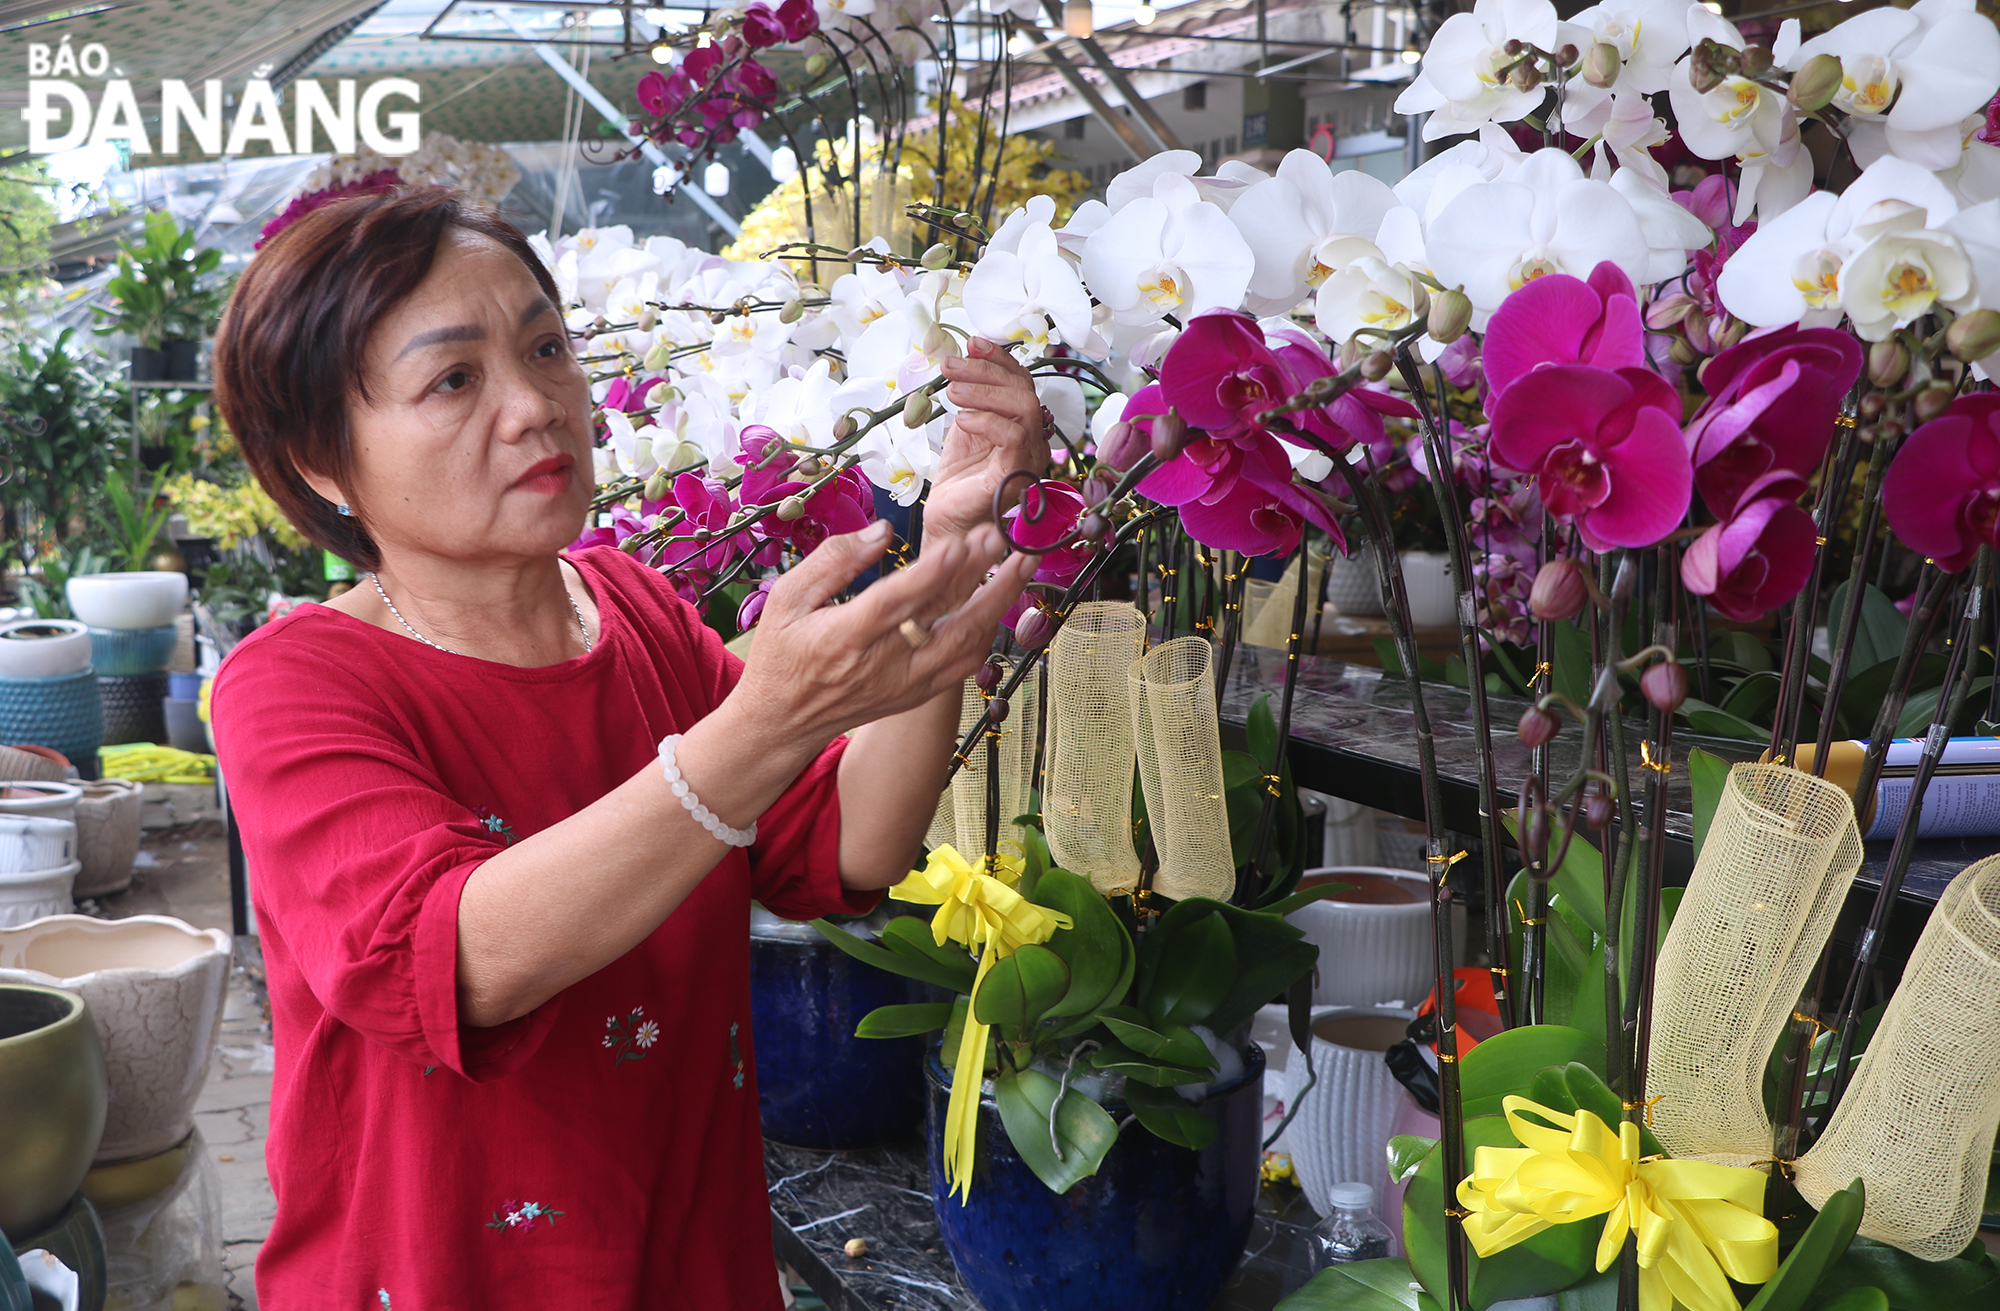 Mrs. Le Thi Luu, the owner of orchid shop Phong Luu on Nguyen Dinh Tuu Street is adjusting orchid branches to deliver to customers.